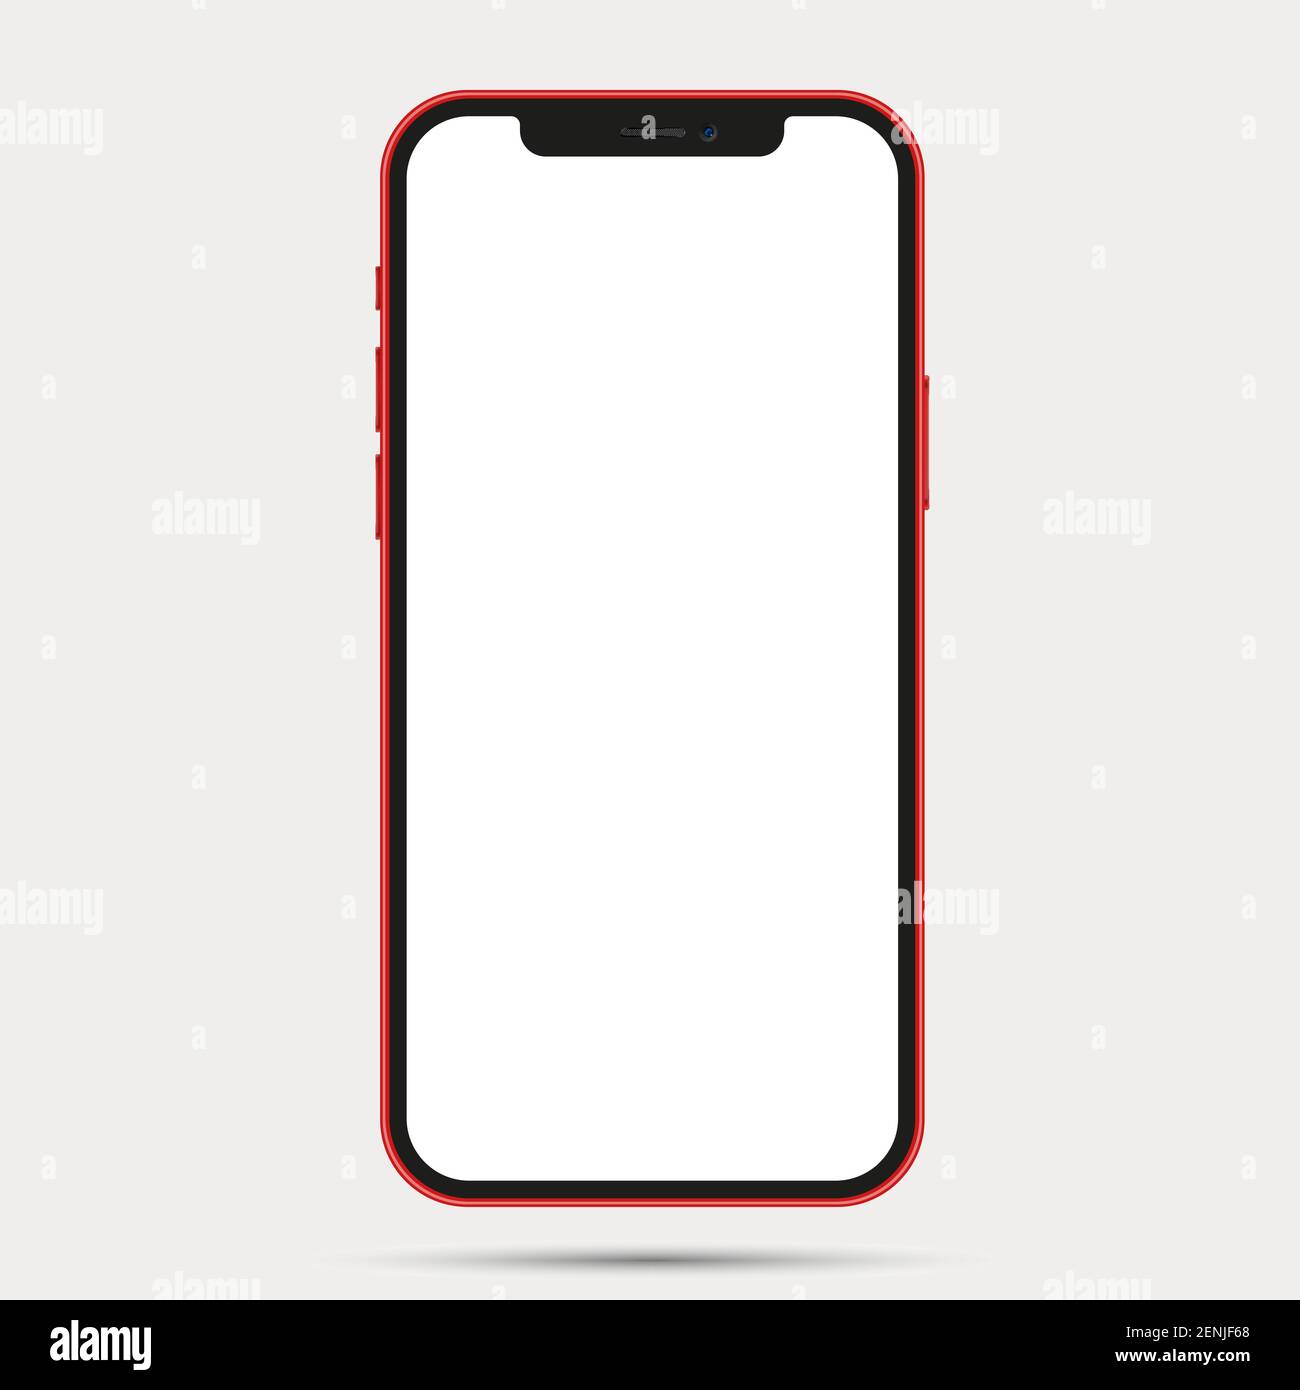 Realistic front view smartphone mockup. Mibile phone red frame with blank white display isolated on background. Vector device Stock Vector